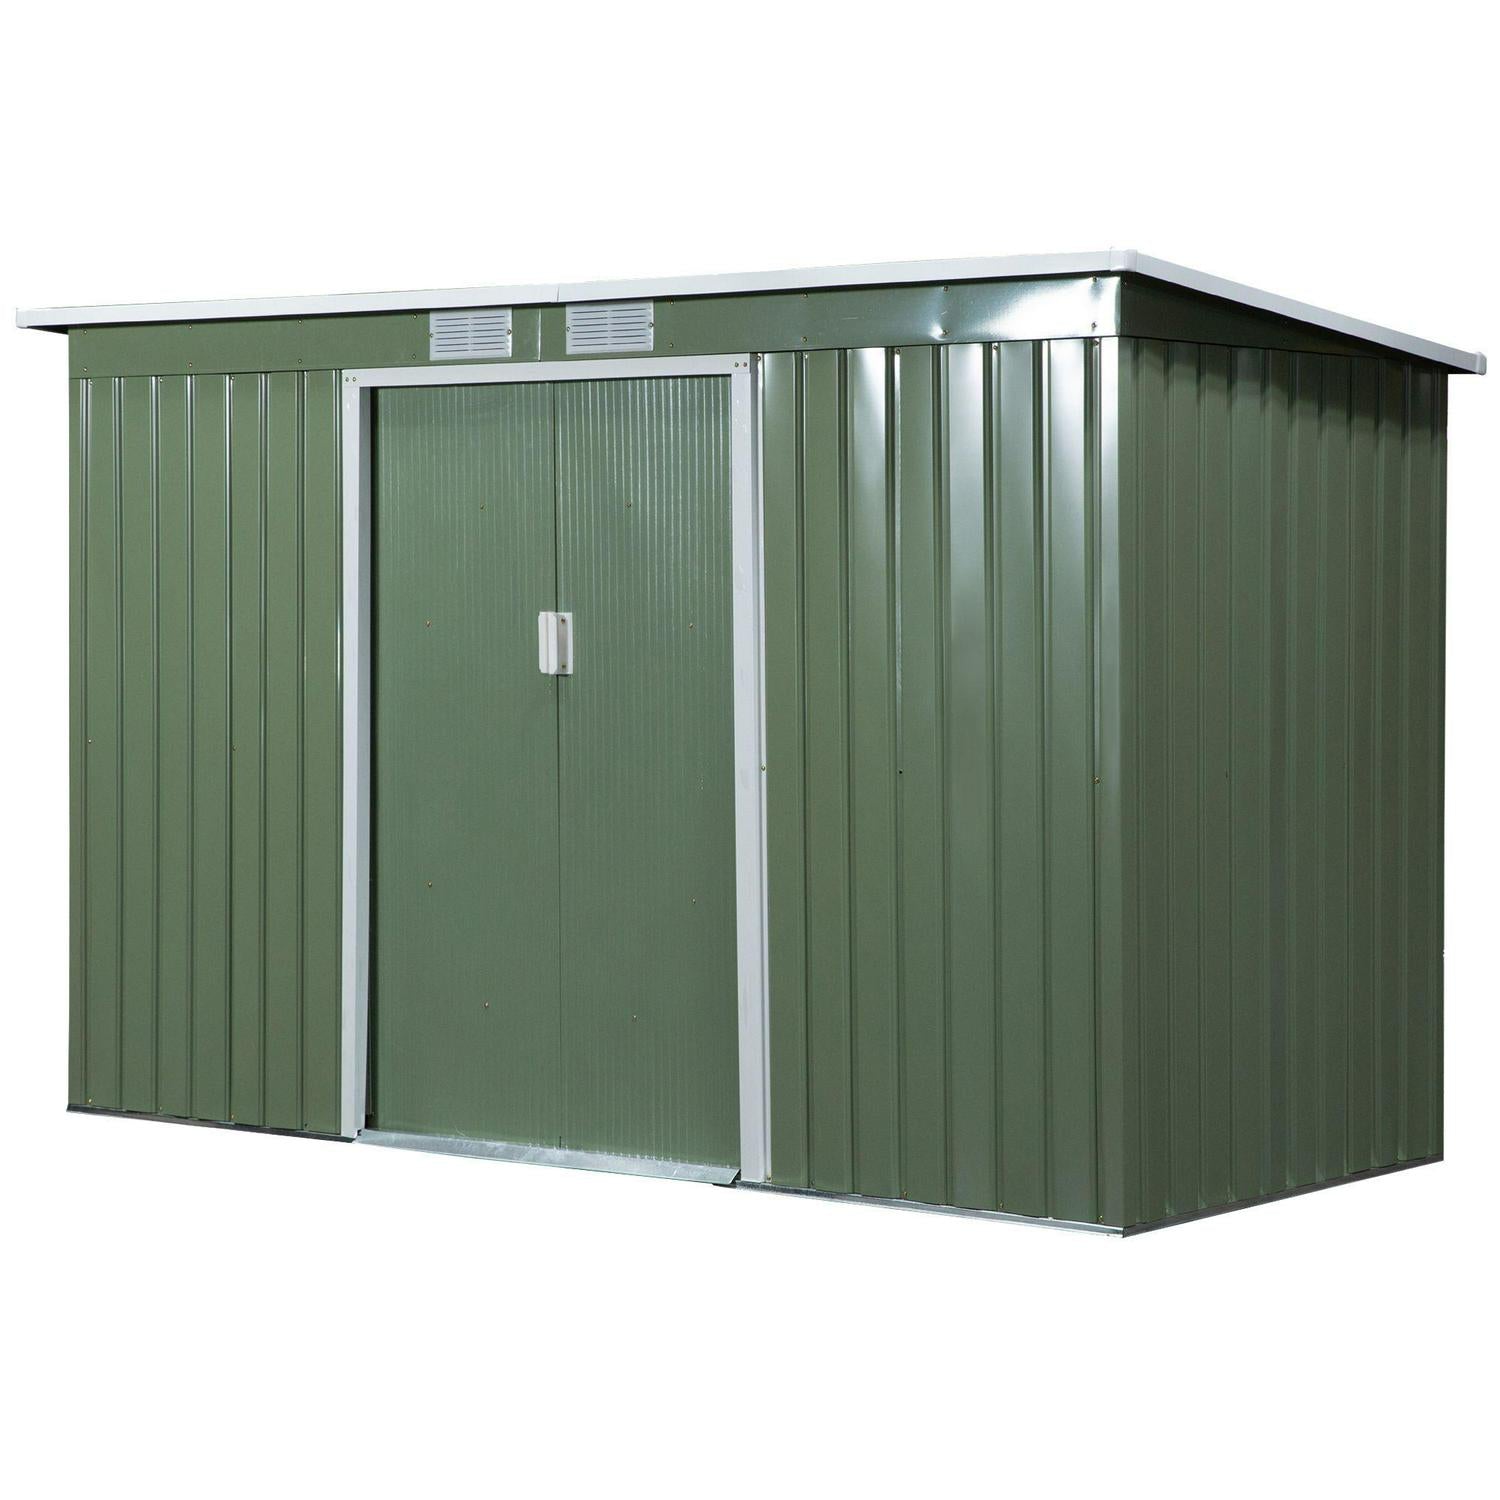 Corrugated Garden Metal Storage Shed Outdoor Equipment Tool Box With Foundation Ventilation And Doors Light Green 9ft X 4.25ft